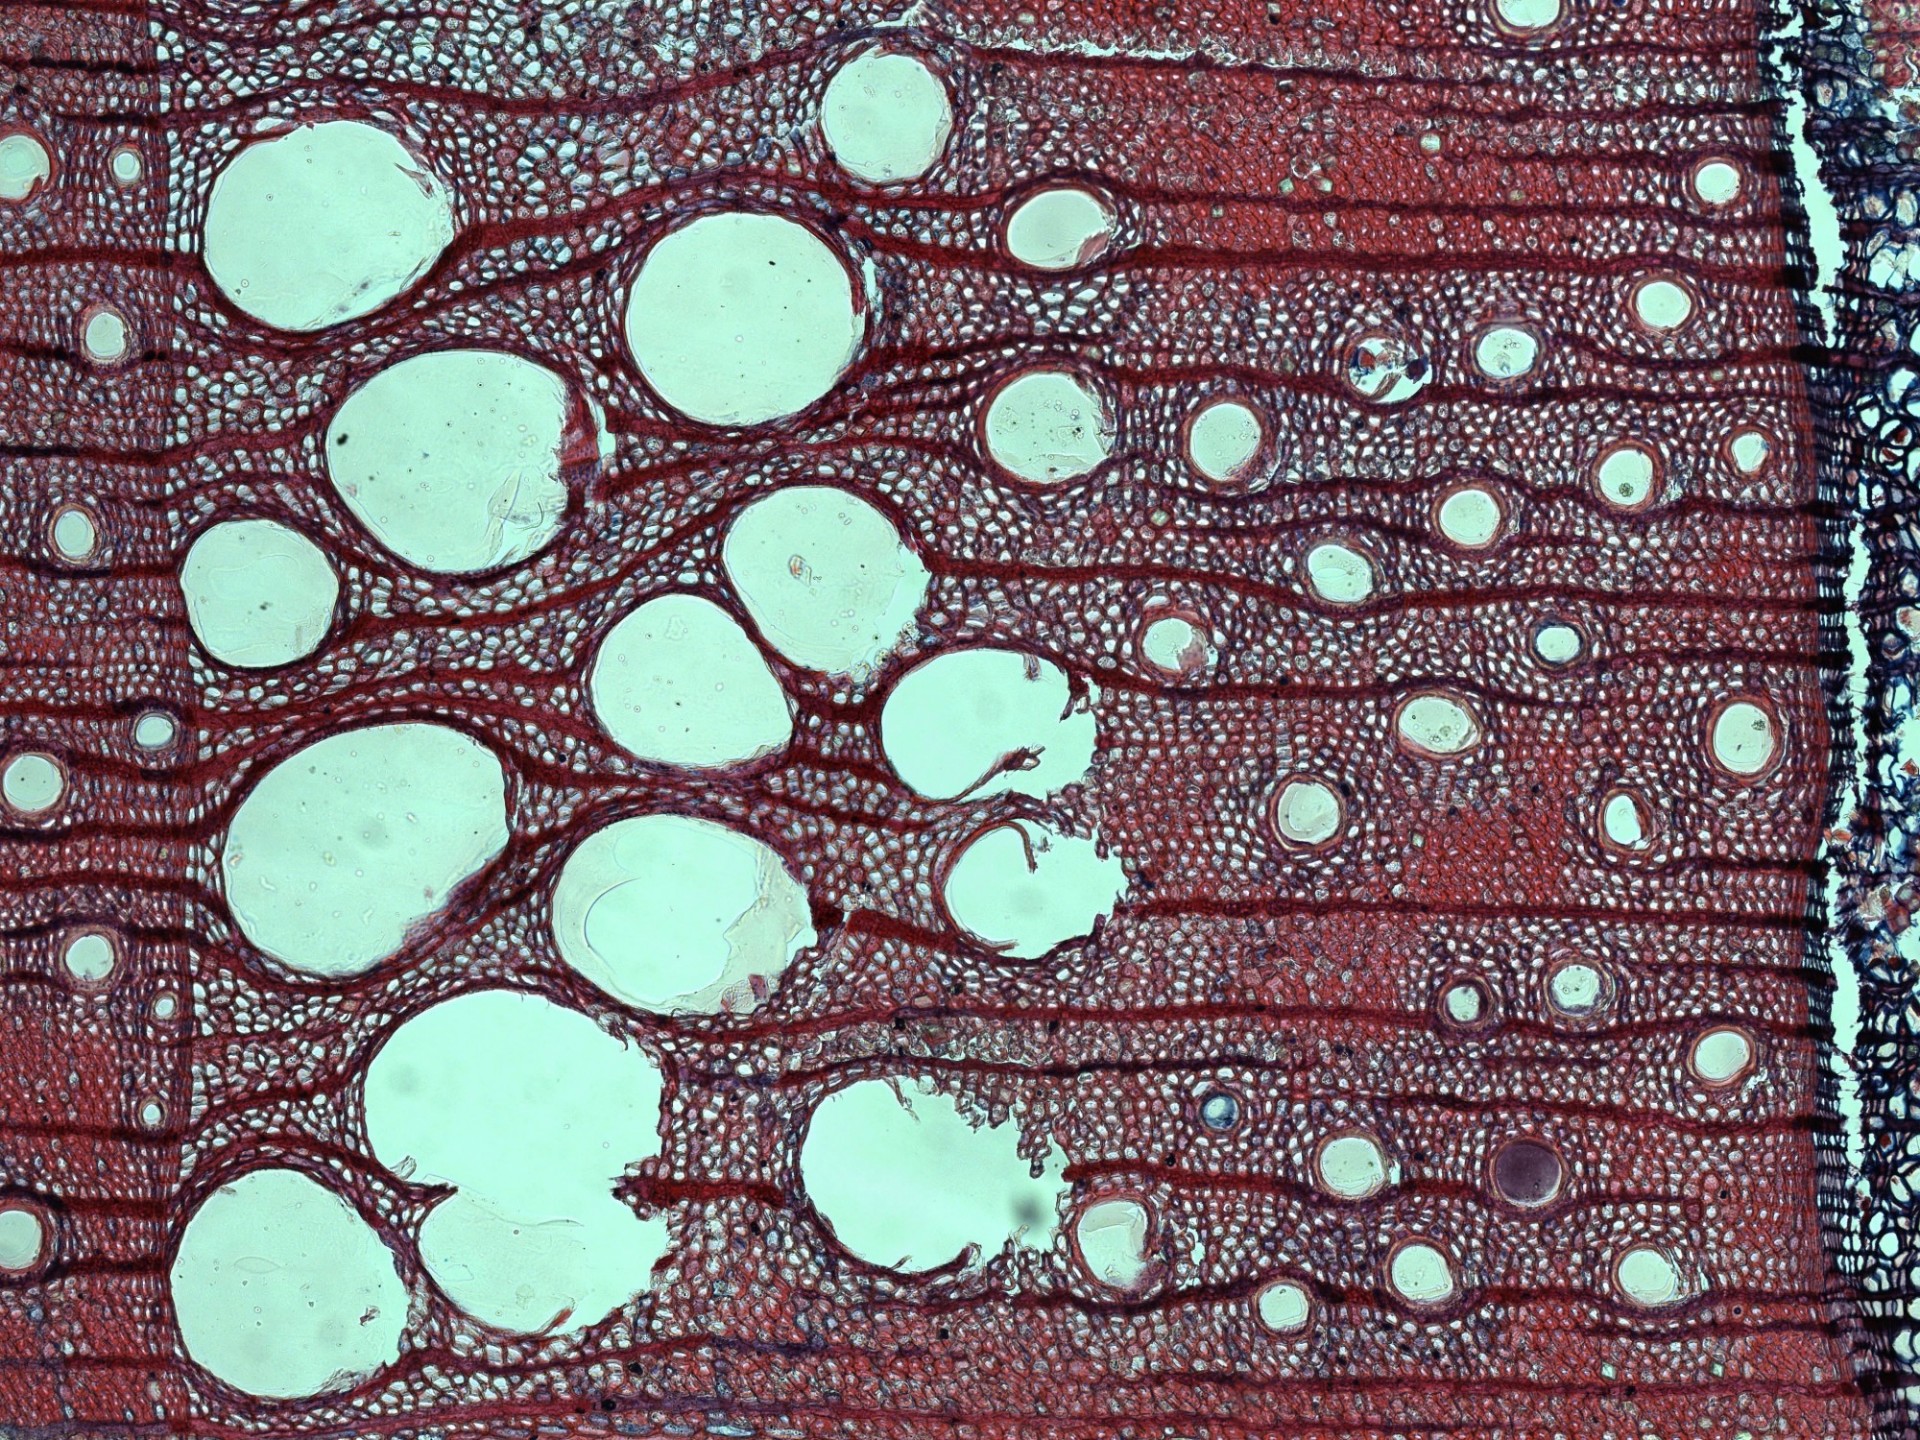 Wood anatomy of Red Oak (Quercus rubra). Sample collected within the Lamont Sanctuary Forest, New York (2021). Anatomical microsection prepared at LDEO Tree Ring Lab by Arturo Pacheco-Solana.